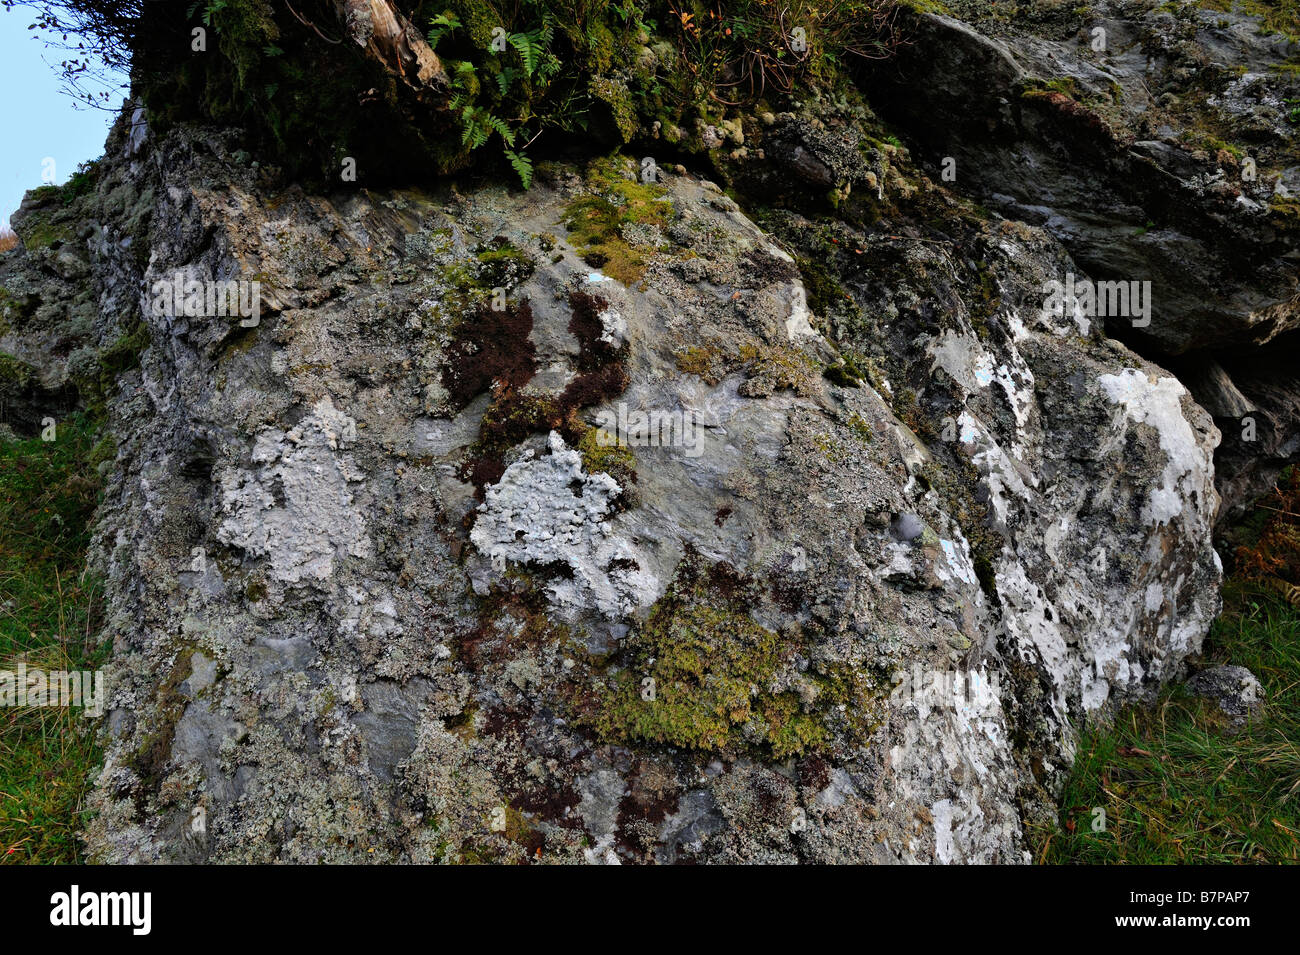 Close up on a lichened and mossy boulder in Glen Falloch below the Crianlarich hills Perthshire Scotland UK Stock Photo